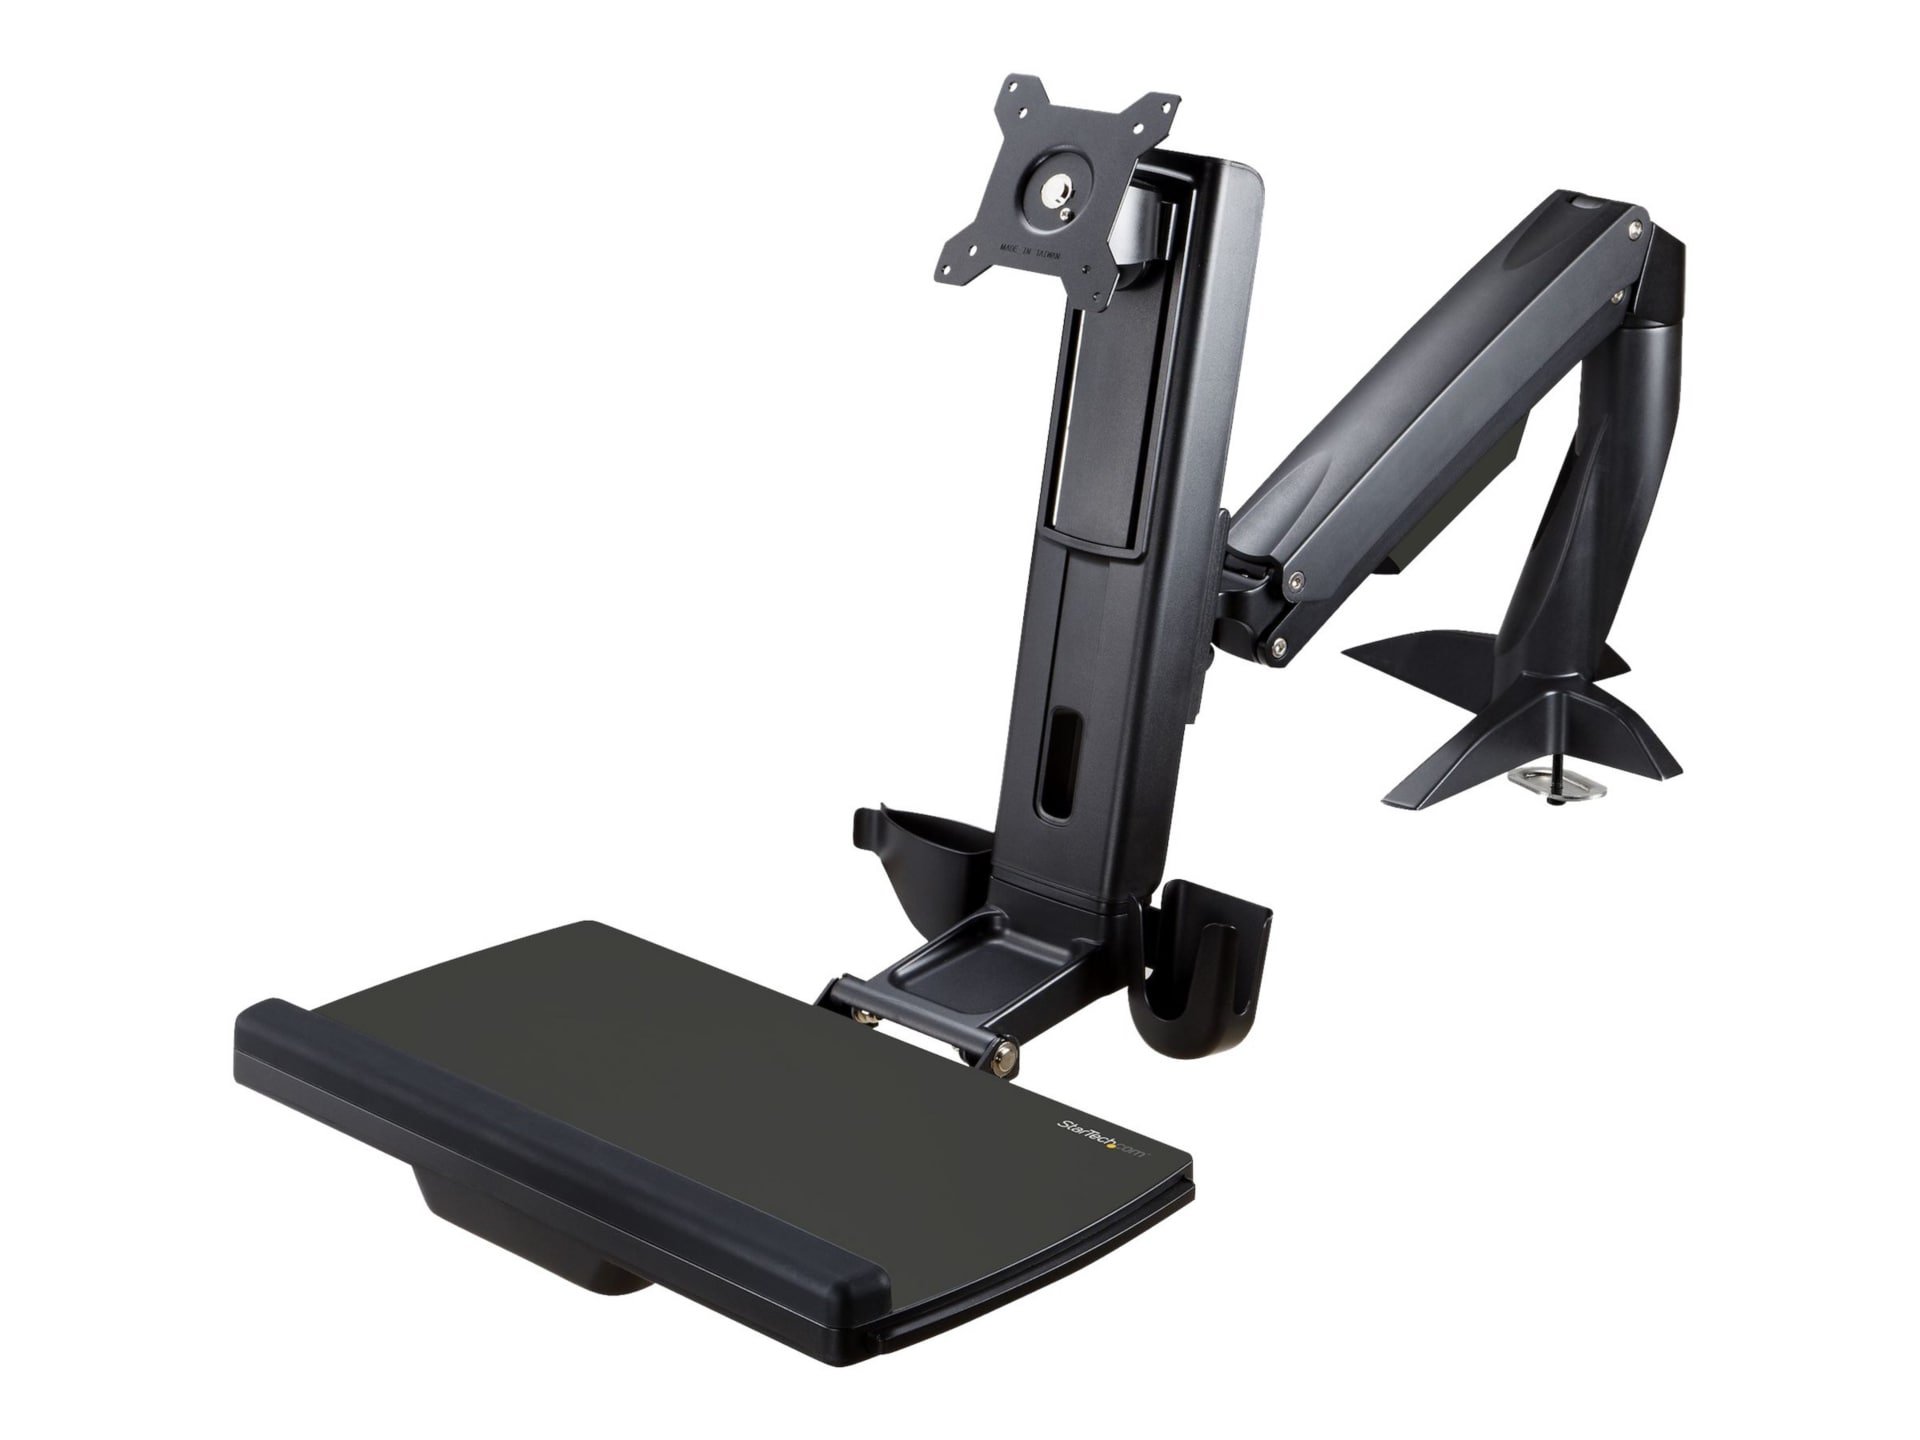 StarTech.com Sit Stand Monitor Arm w/ Keyboard Tray - Adjustable Desk Mount Workstation 27in Display